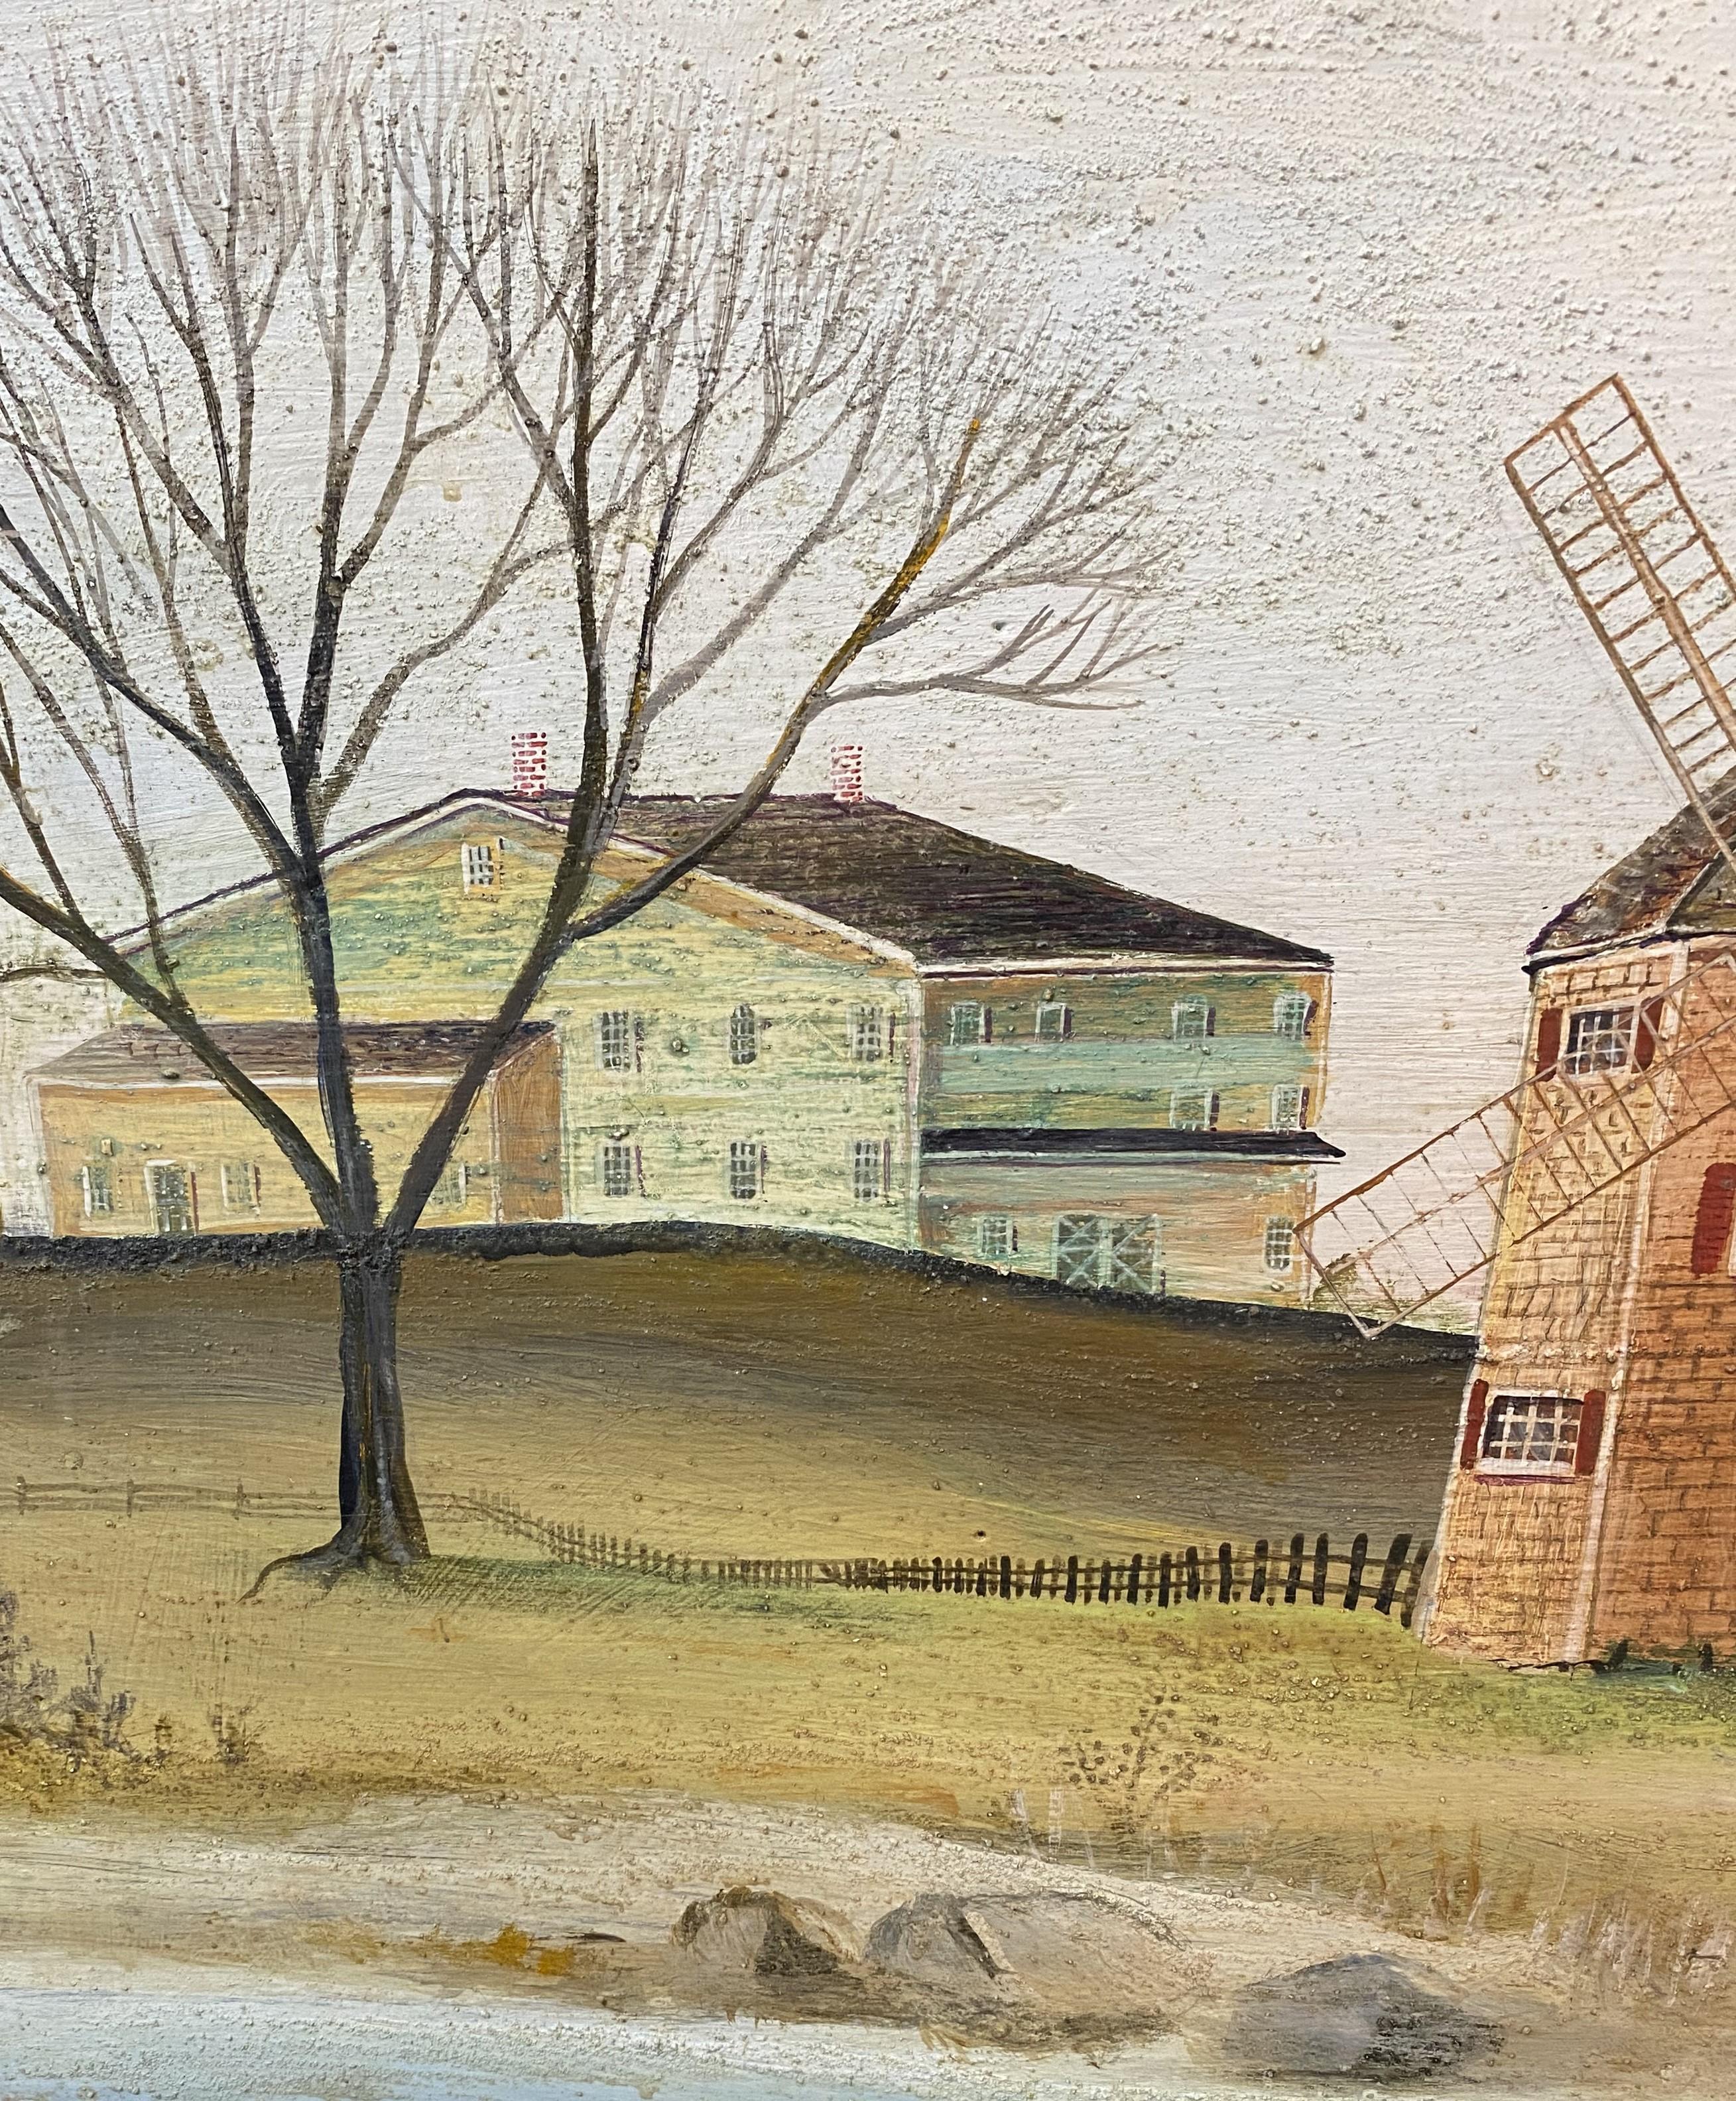 A fine naive landscape painting with a windmill by American artist Janet Munro (b. 1949). Munro was born in Woburn, MA, and her work focuses on the waterfront lives of everyday people - her favorite subjects are her native Massachusetts, New